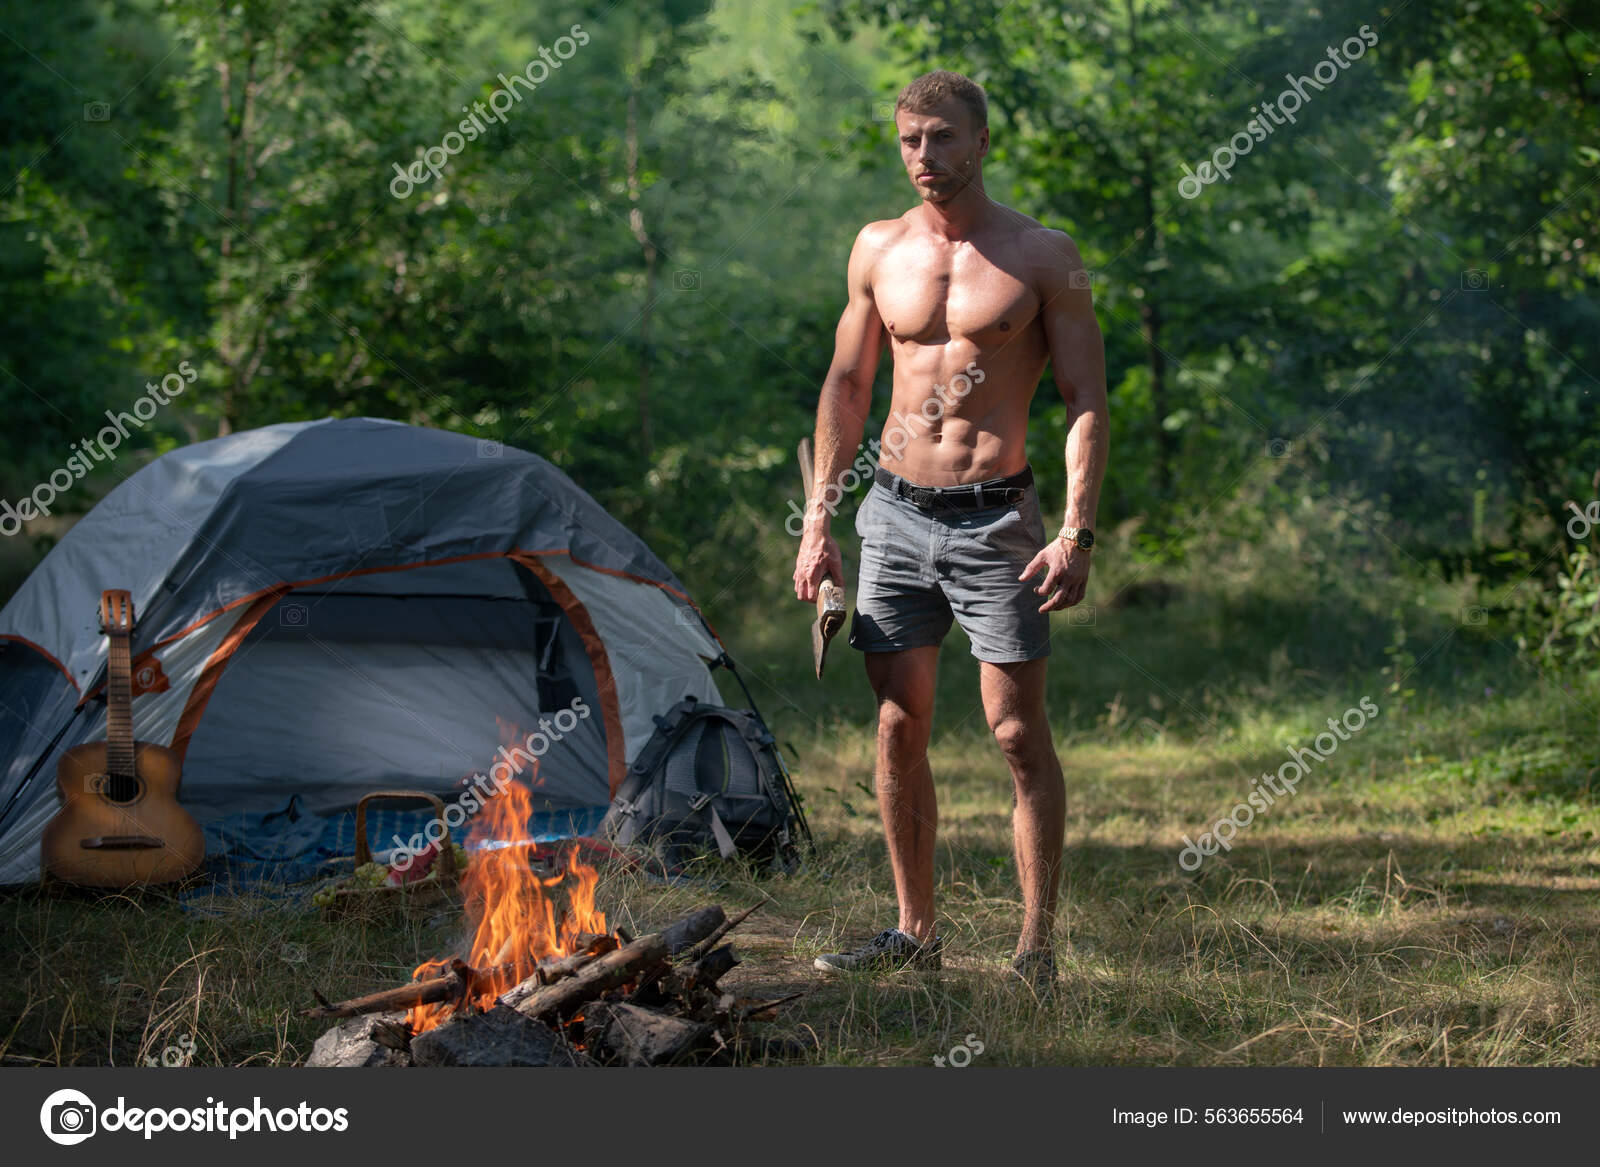 Camping season with campfire. Man with naked torso, picnic tourism camp.  Man lumberjack with axe look at bonfire flame on summer day on natural  landscape. Traveling, camping hiking vacation. Stock Photo by ©